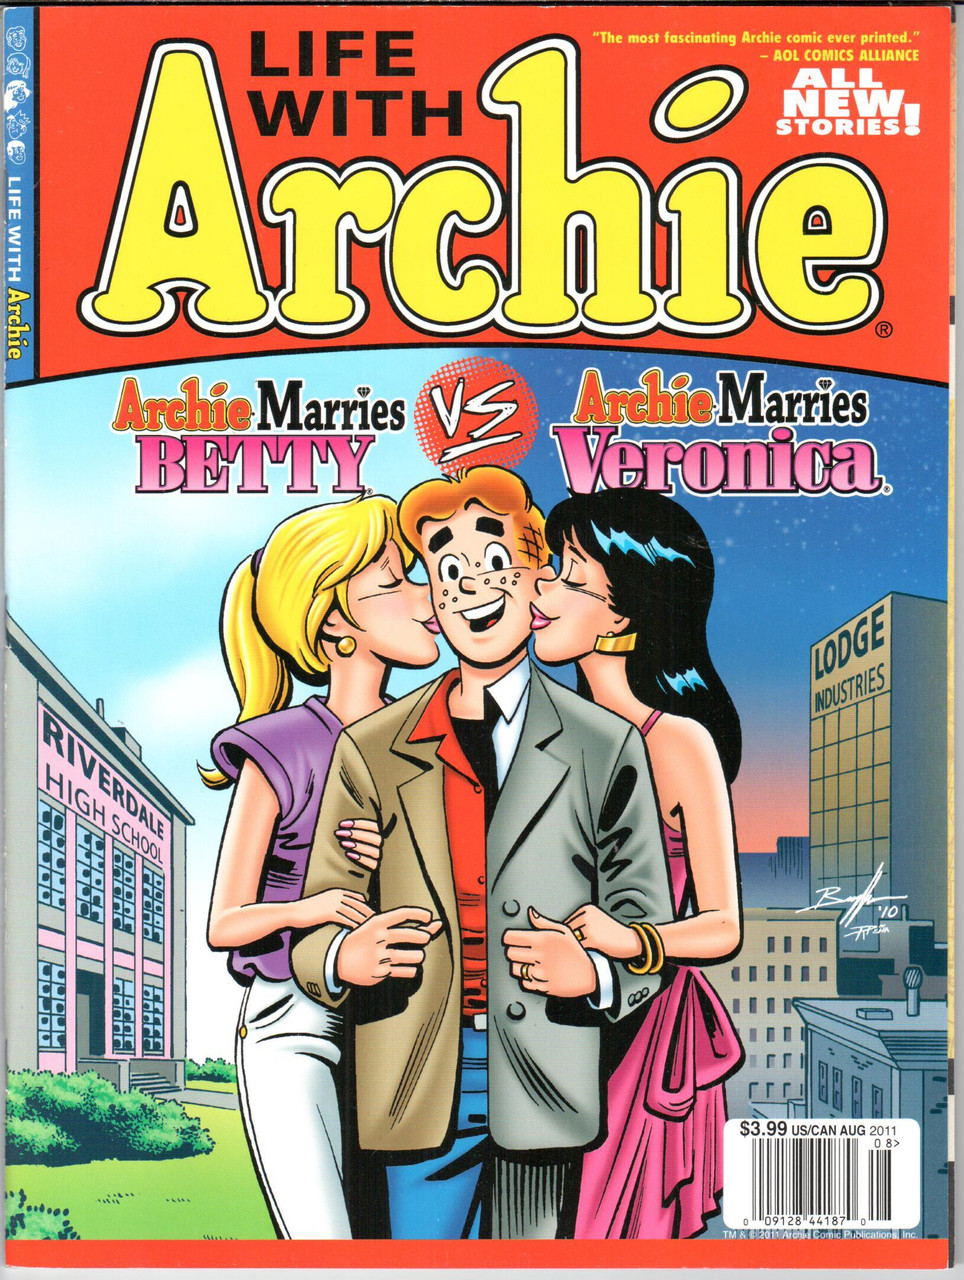 Life with Archie (2010 Sereis) #11 VF- 7.5